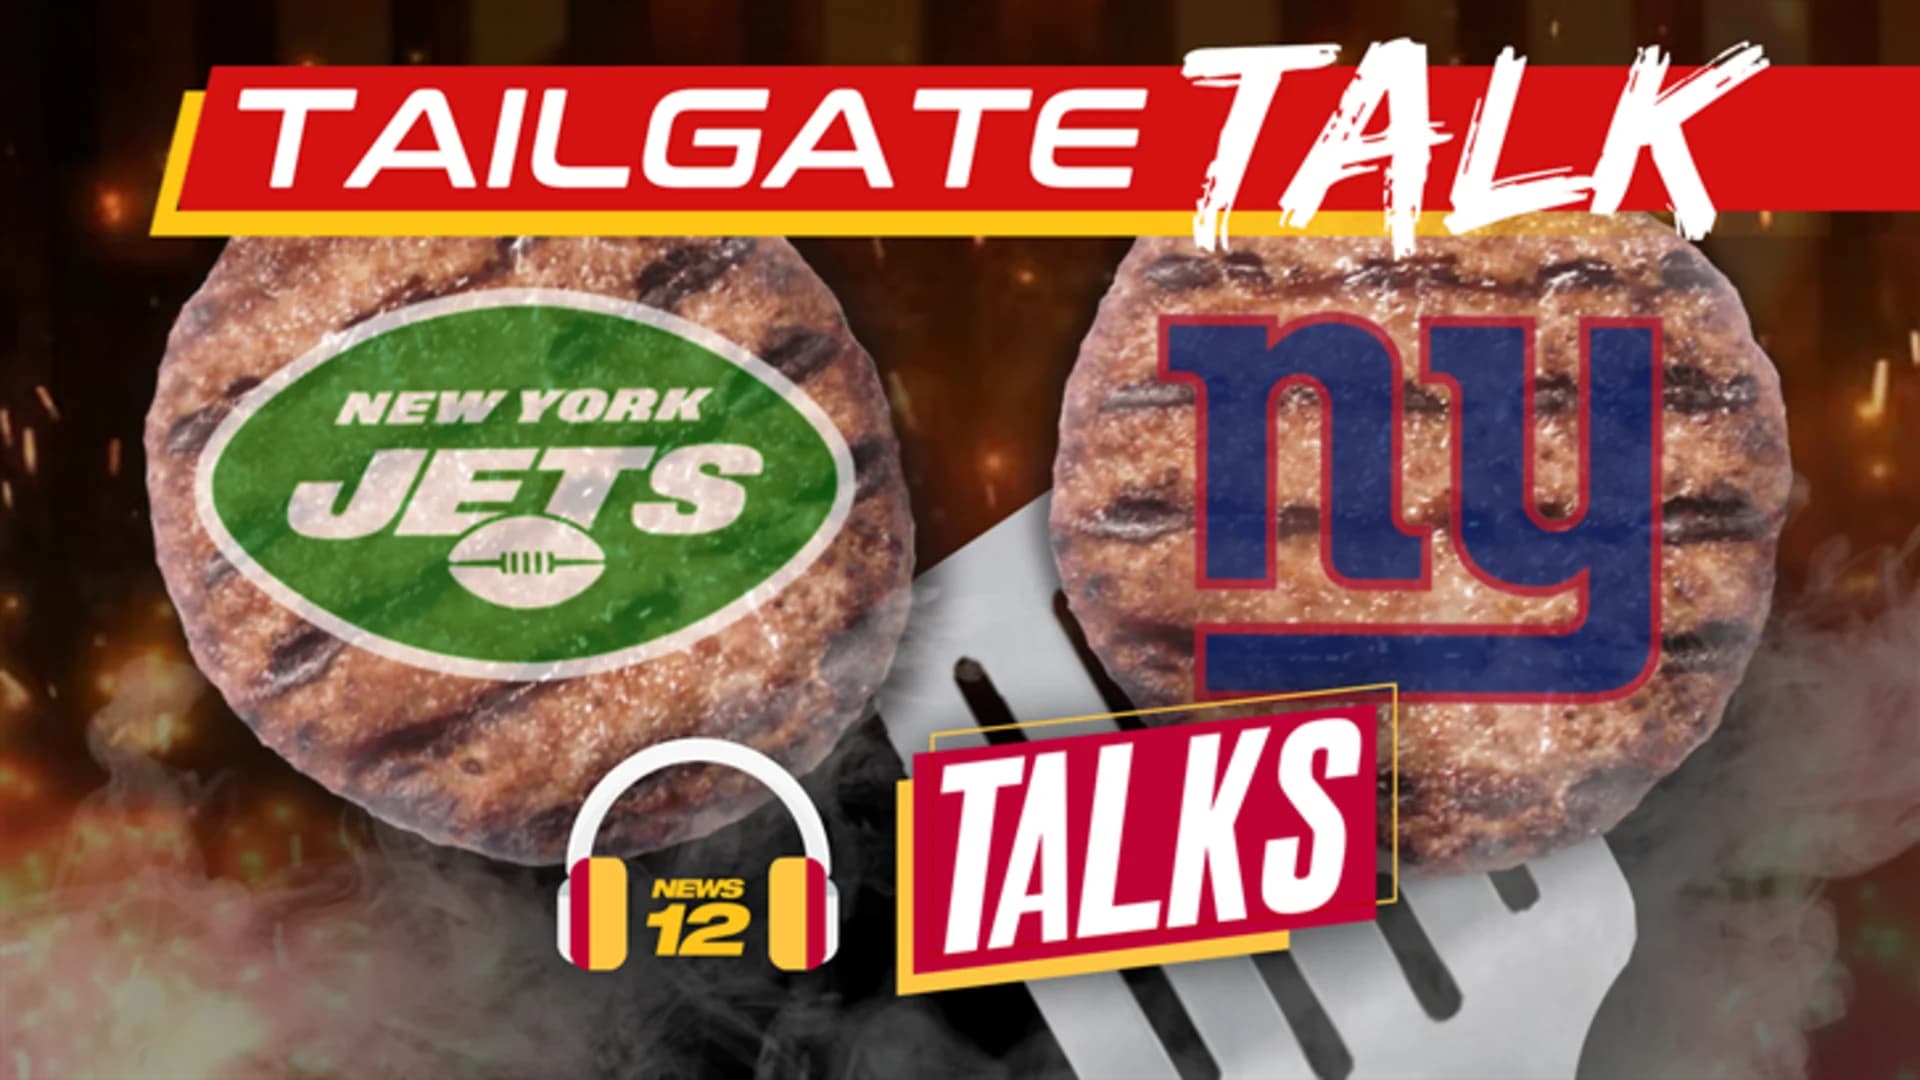 Jets & Giants Tailgate Talk: Week 1 with guest Rich Cimini